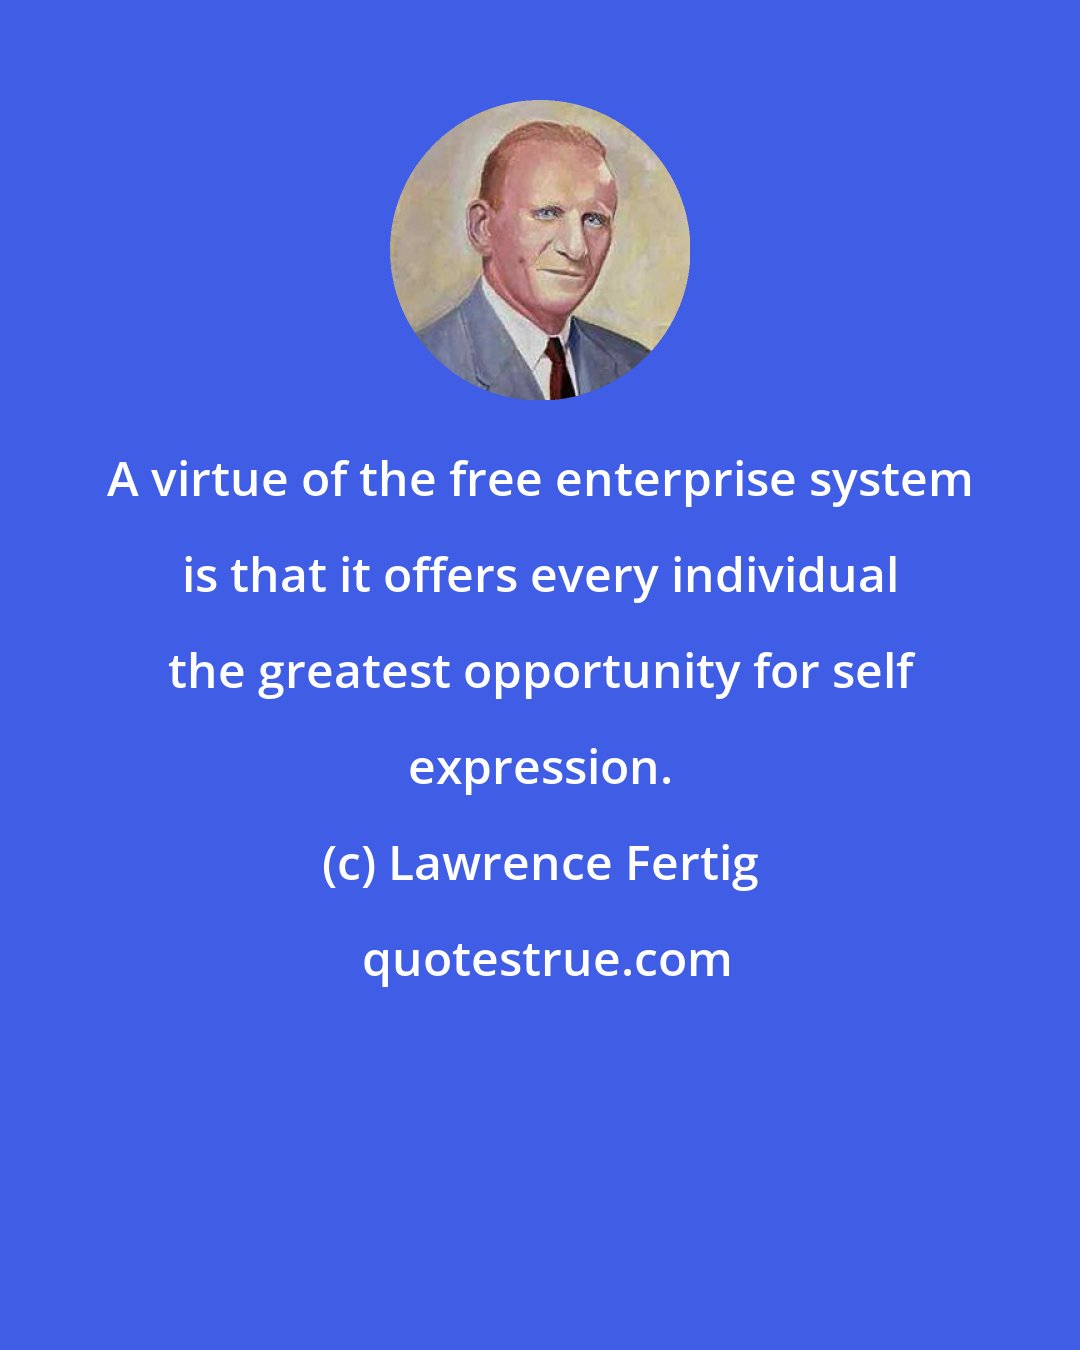 Lawrence Fertig: A virtue of the free enterprise system is that it offers every individual the greatest opportunity for self expression.